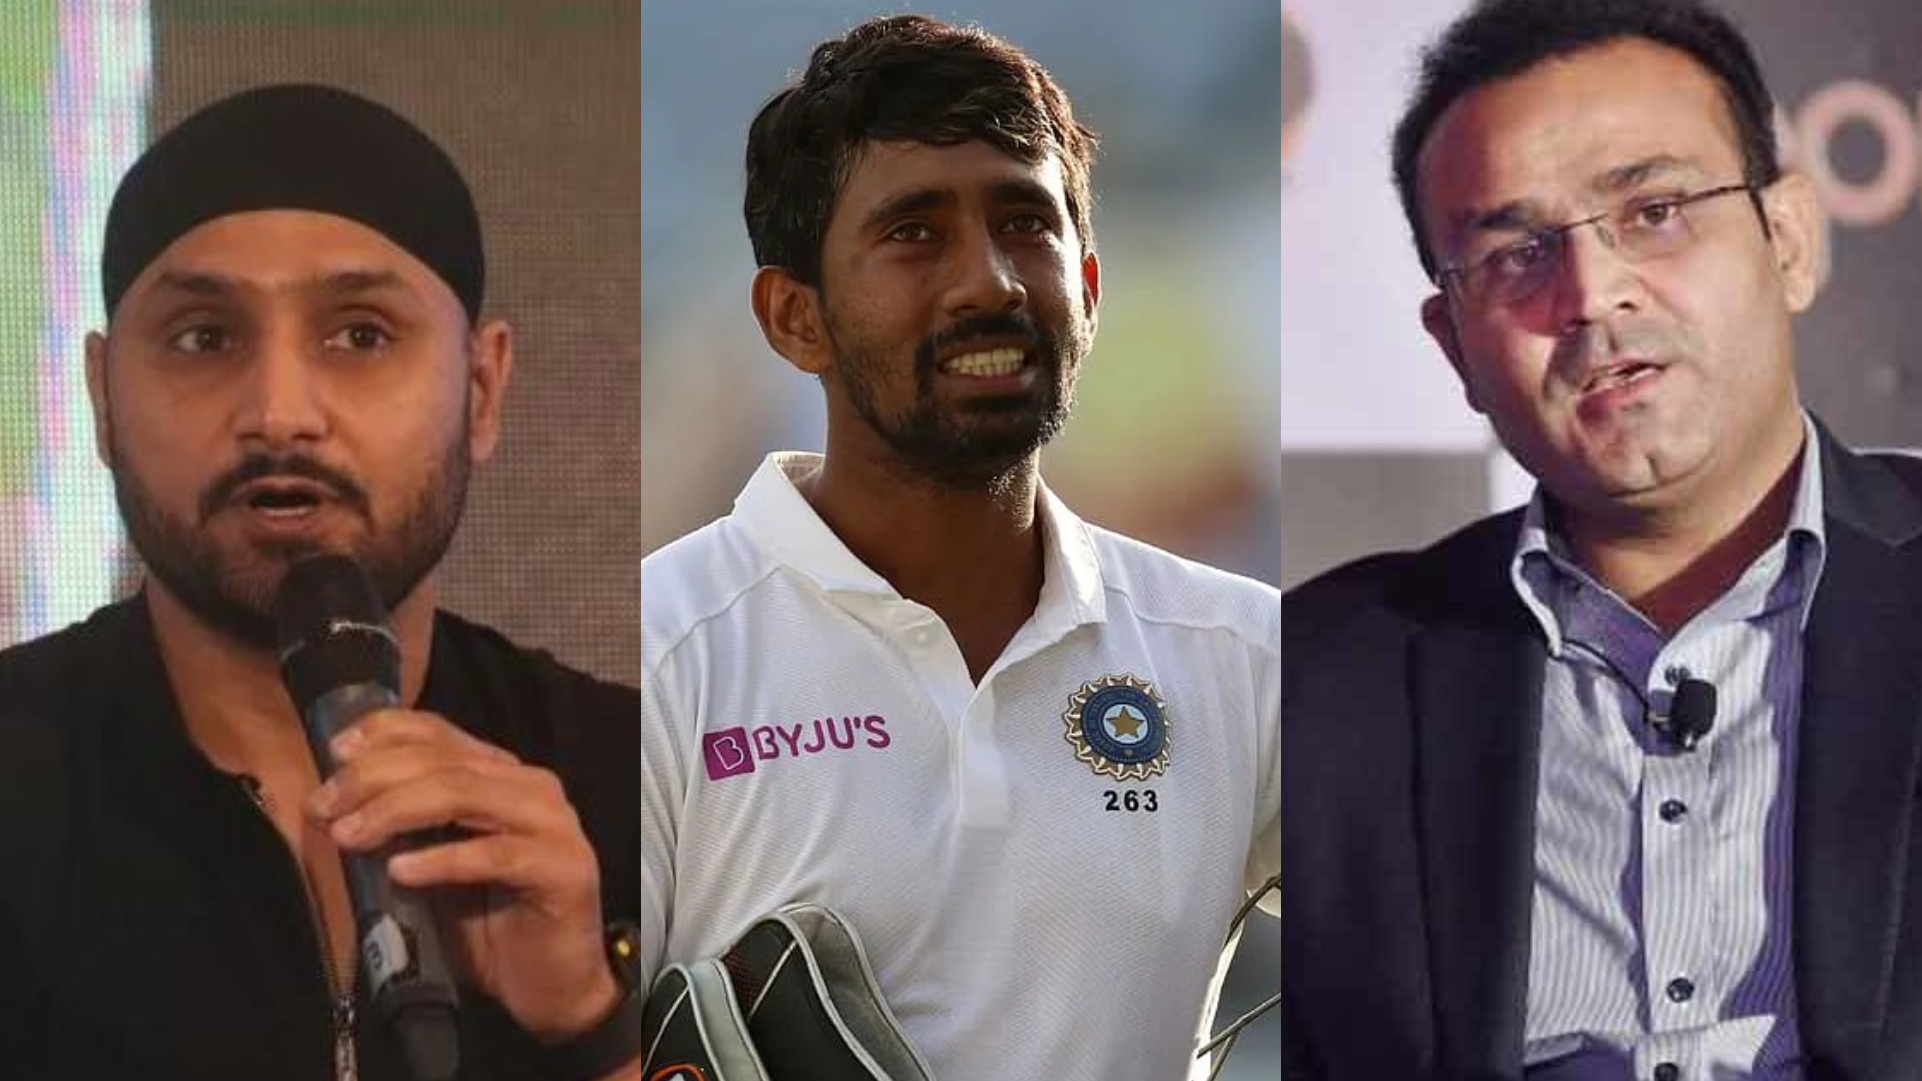 Virender Sehwag and Harbhajan Singh come in support of Wriddhiman Saha after a journo threatens him